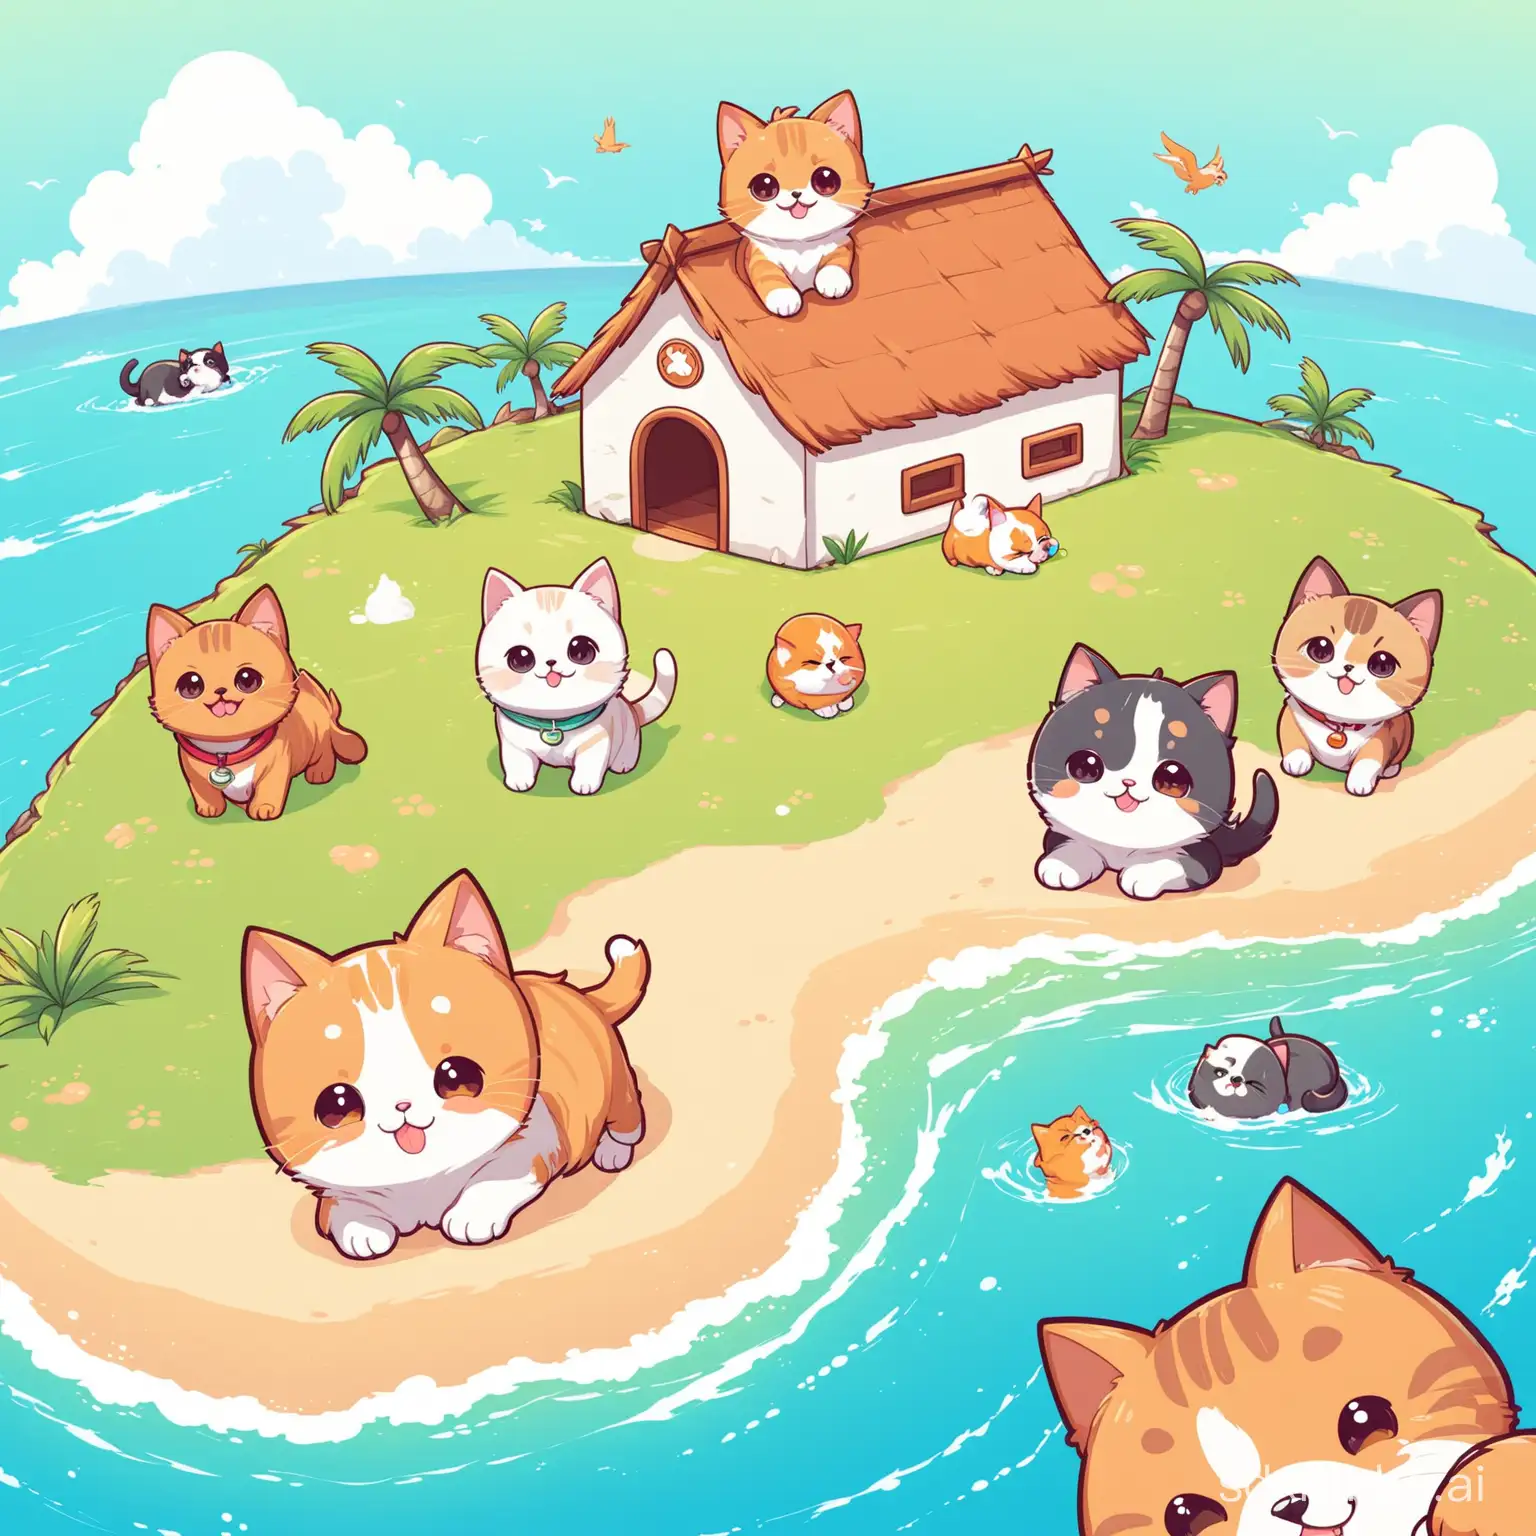 Draw a cute island logo with three cute cats and dogs